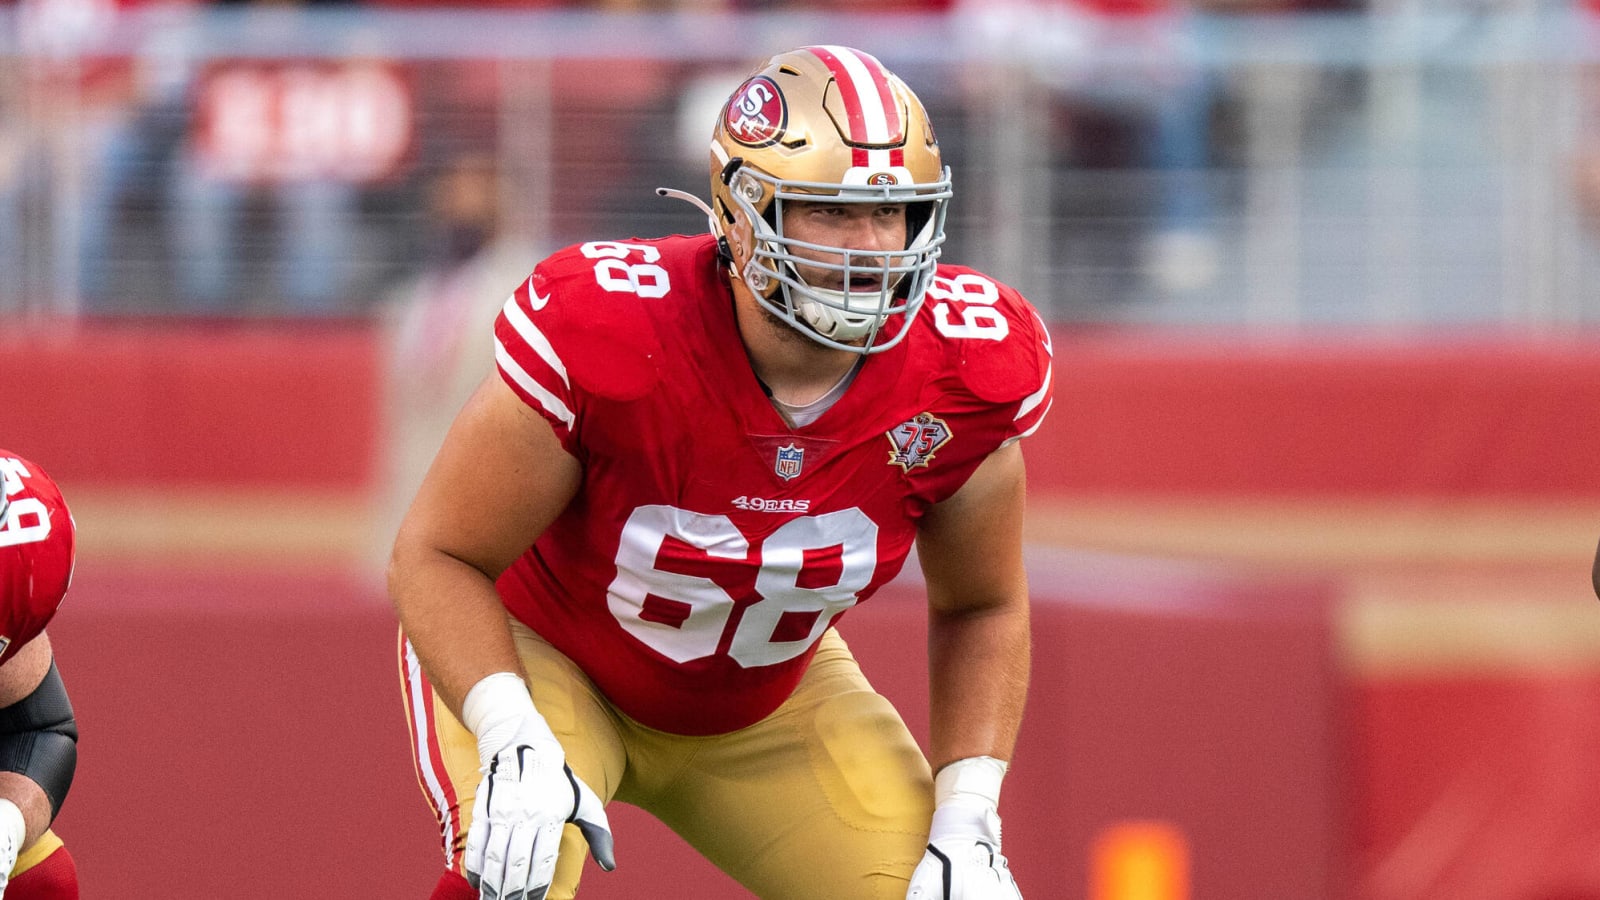 49ers OL coach Chris Foerster on RT Colton McKivitz: "The job is his coming into it"